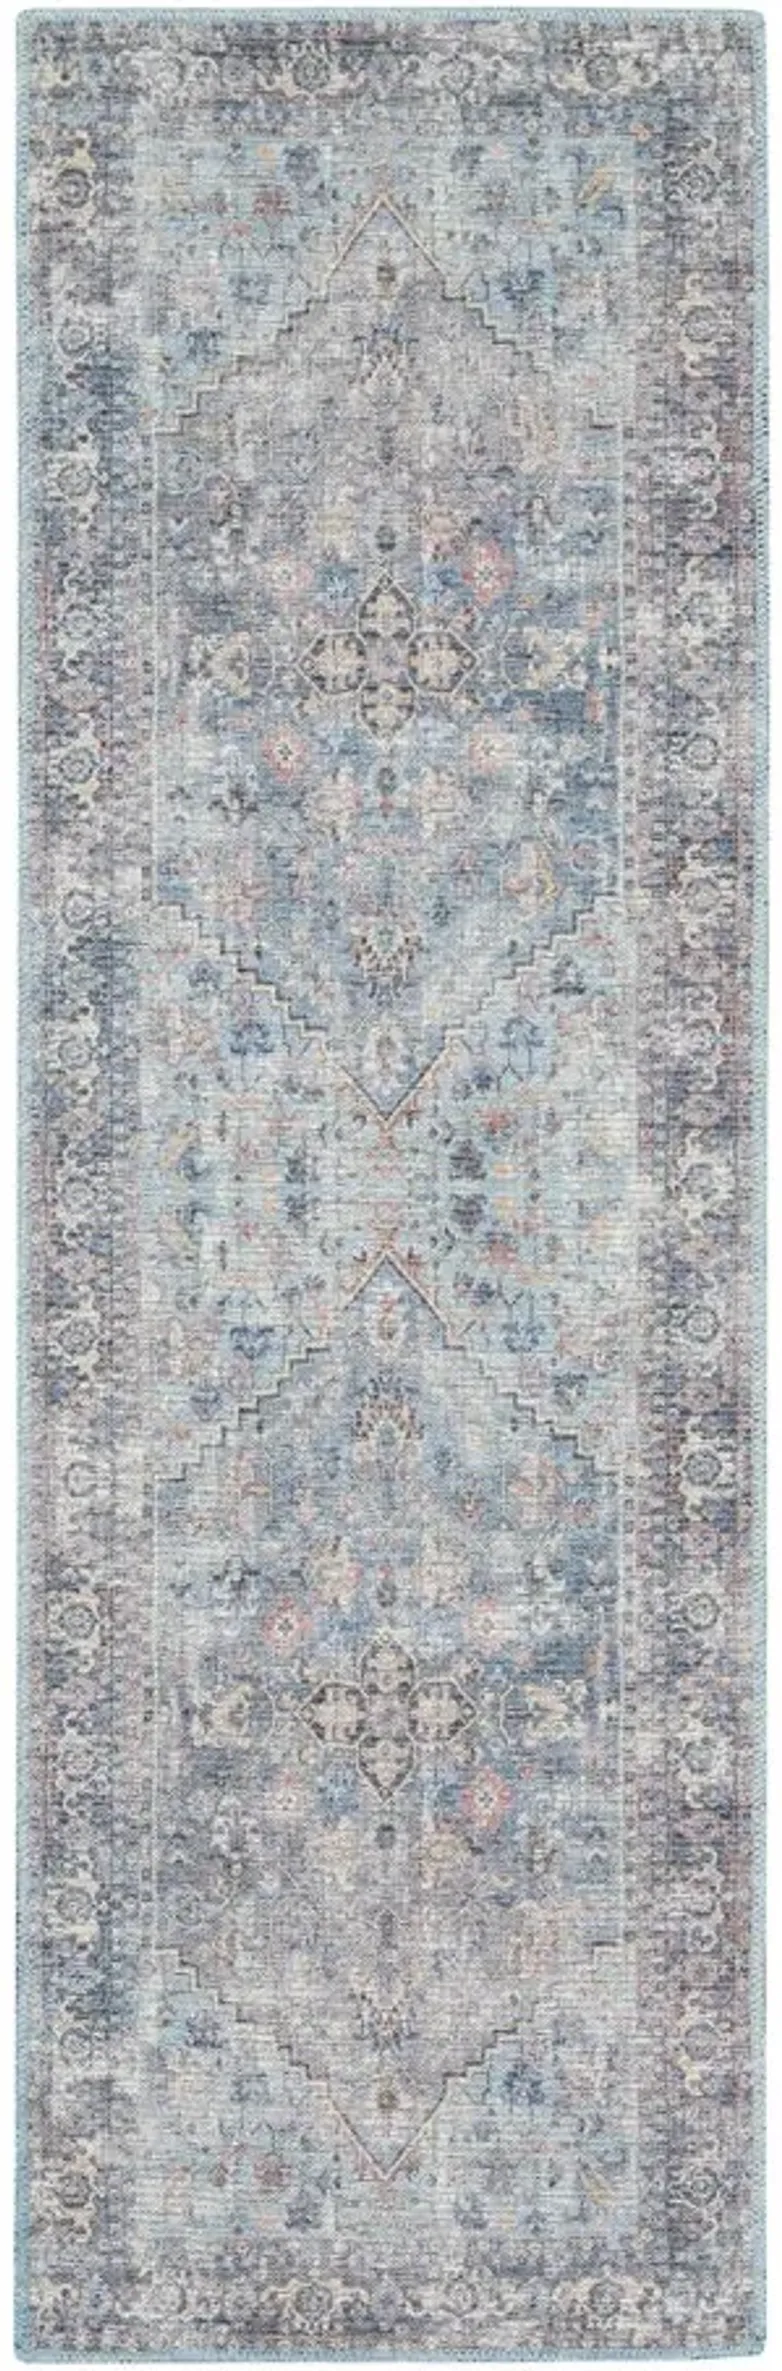 Nicole Curtis Albuquerque Runner Rug in Light Gray/Blue by Nourison